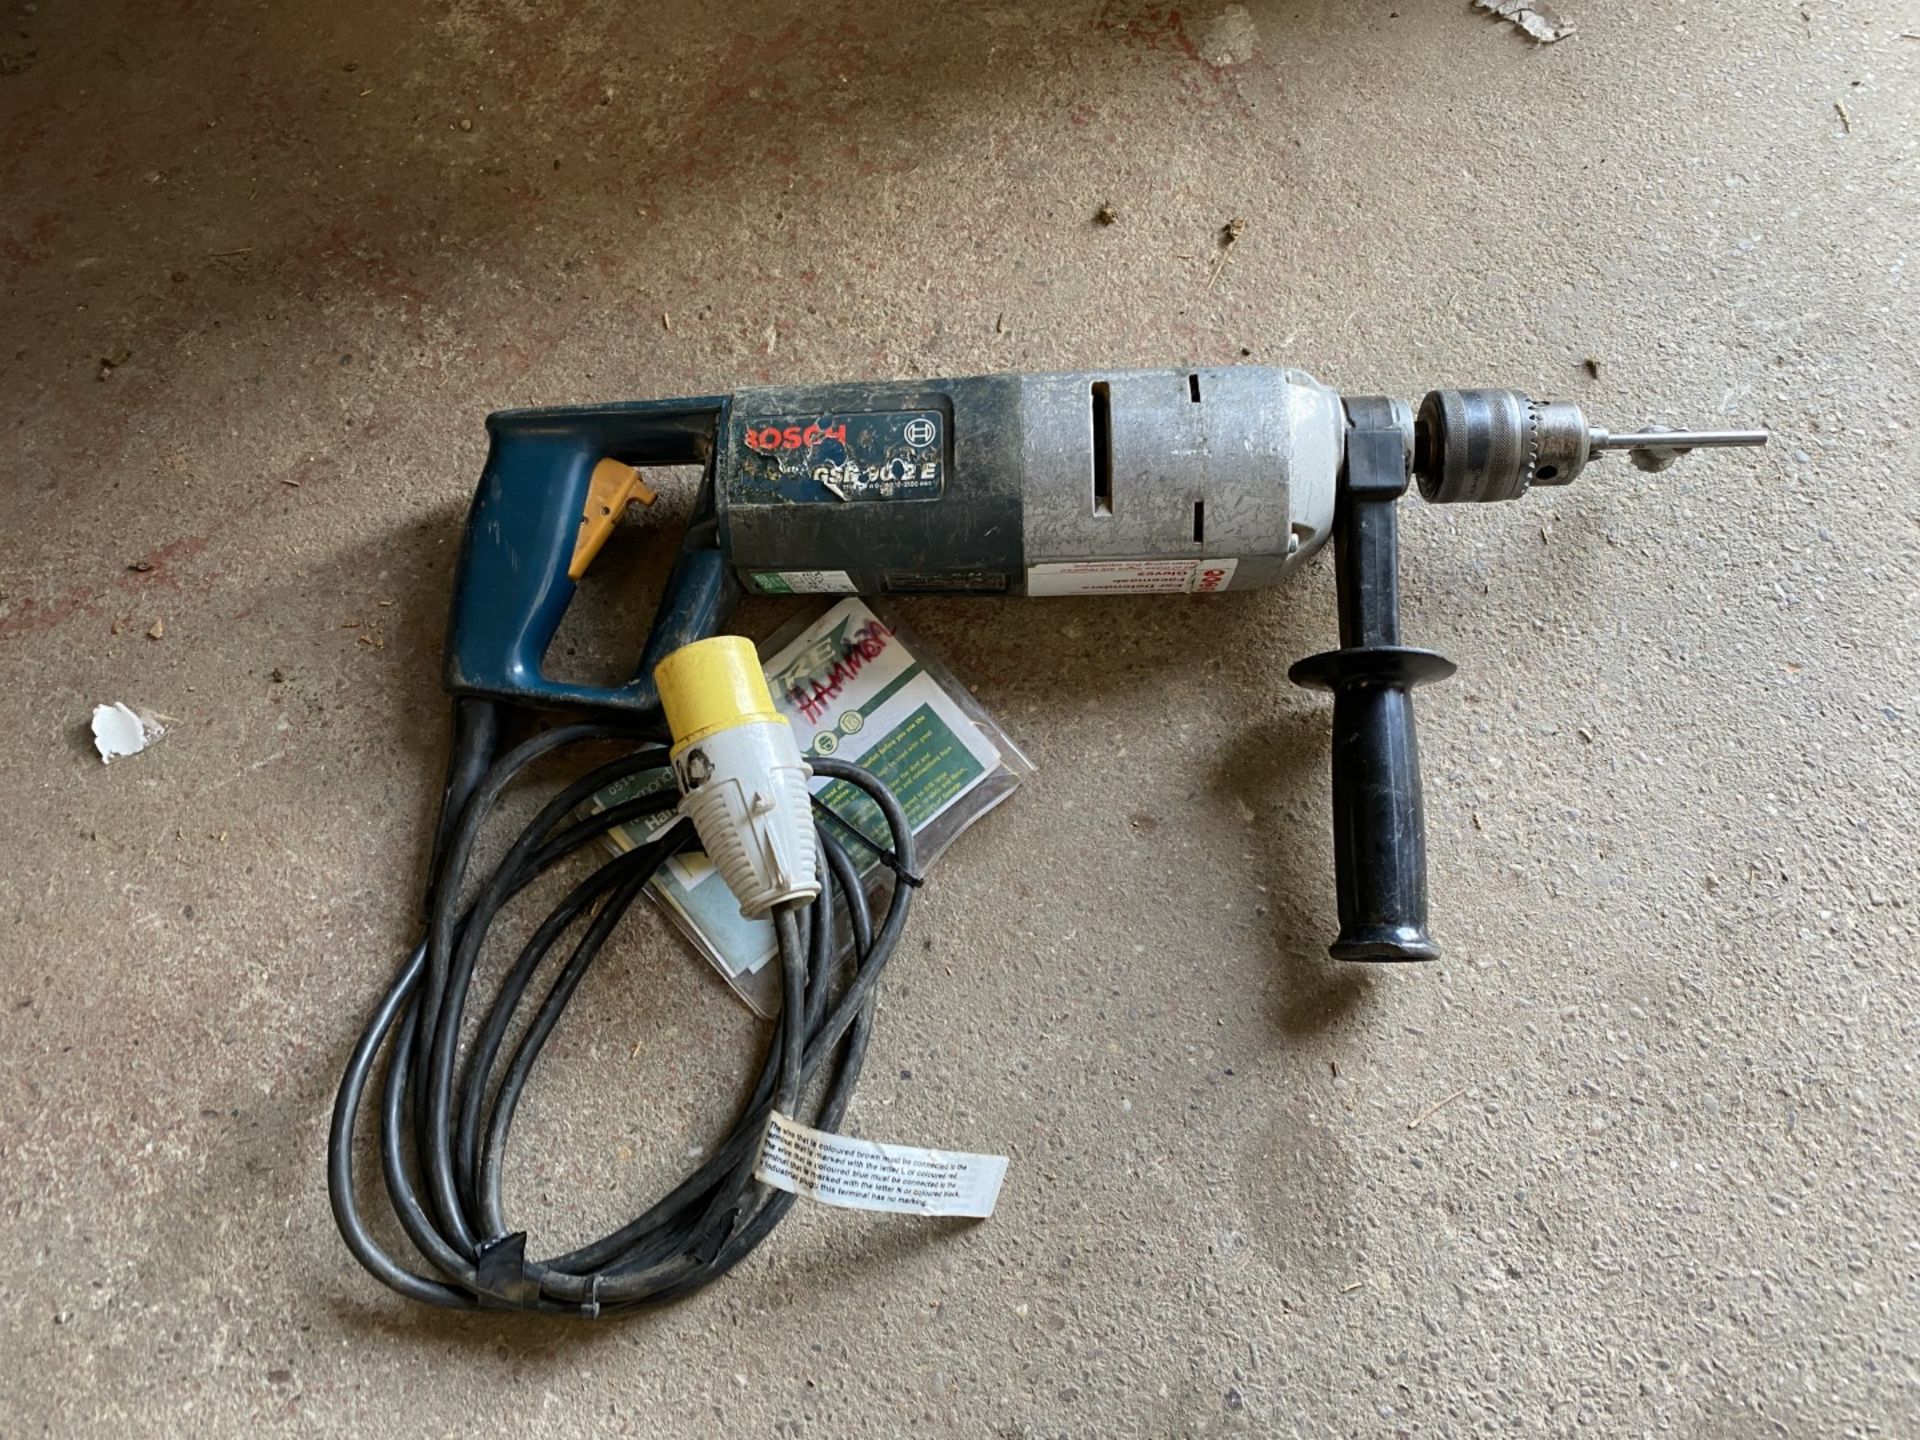 Bosch GSB 90-2E impact drill, 110v - NOT TESTED - Image 2 of 5